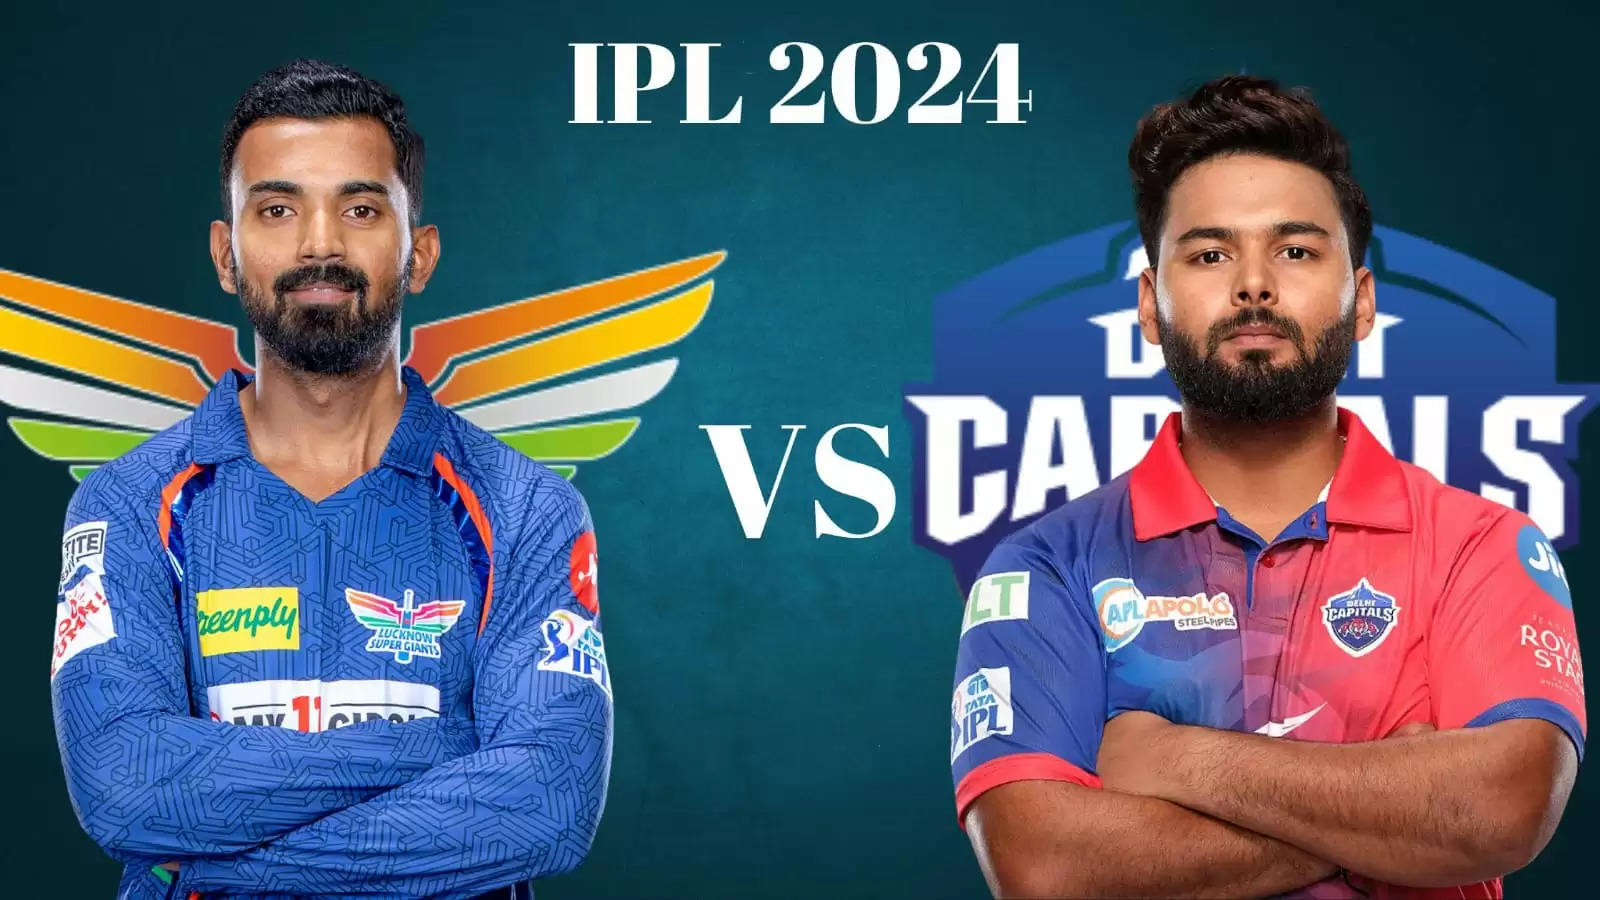 LKN vs DC Dream11 Prediction Today Match 26: Playing XI, IPL 2024 Fantasy Cricket Tips, Lucknow Super Giants vs Delhi Capitals Dream11 Team, Weather and Pitch Report, Injury Updates and Team News